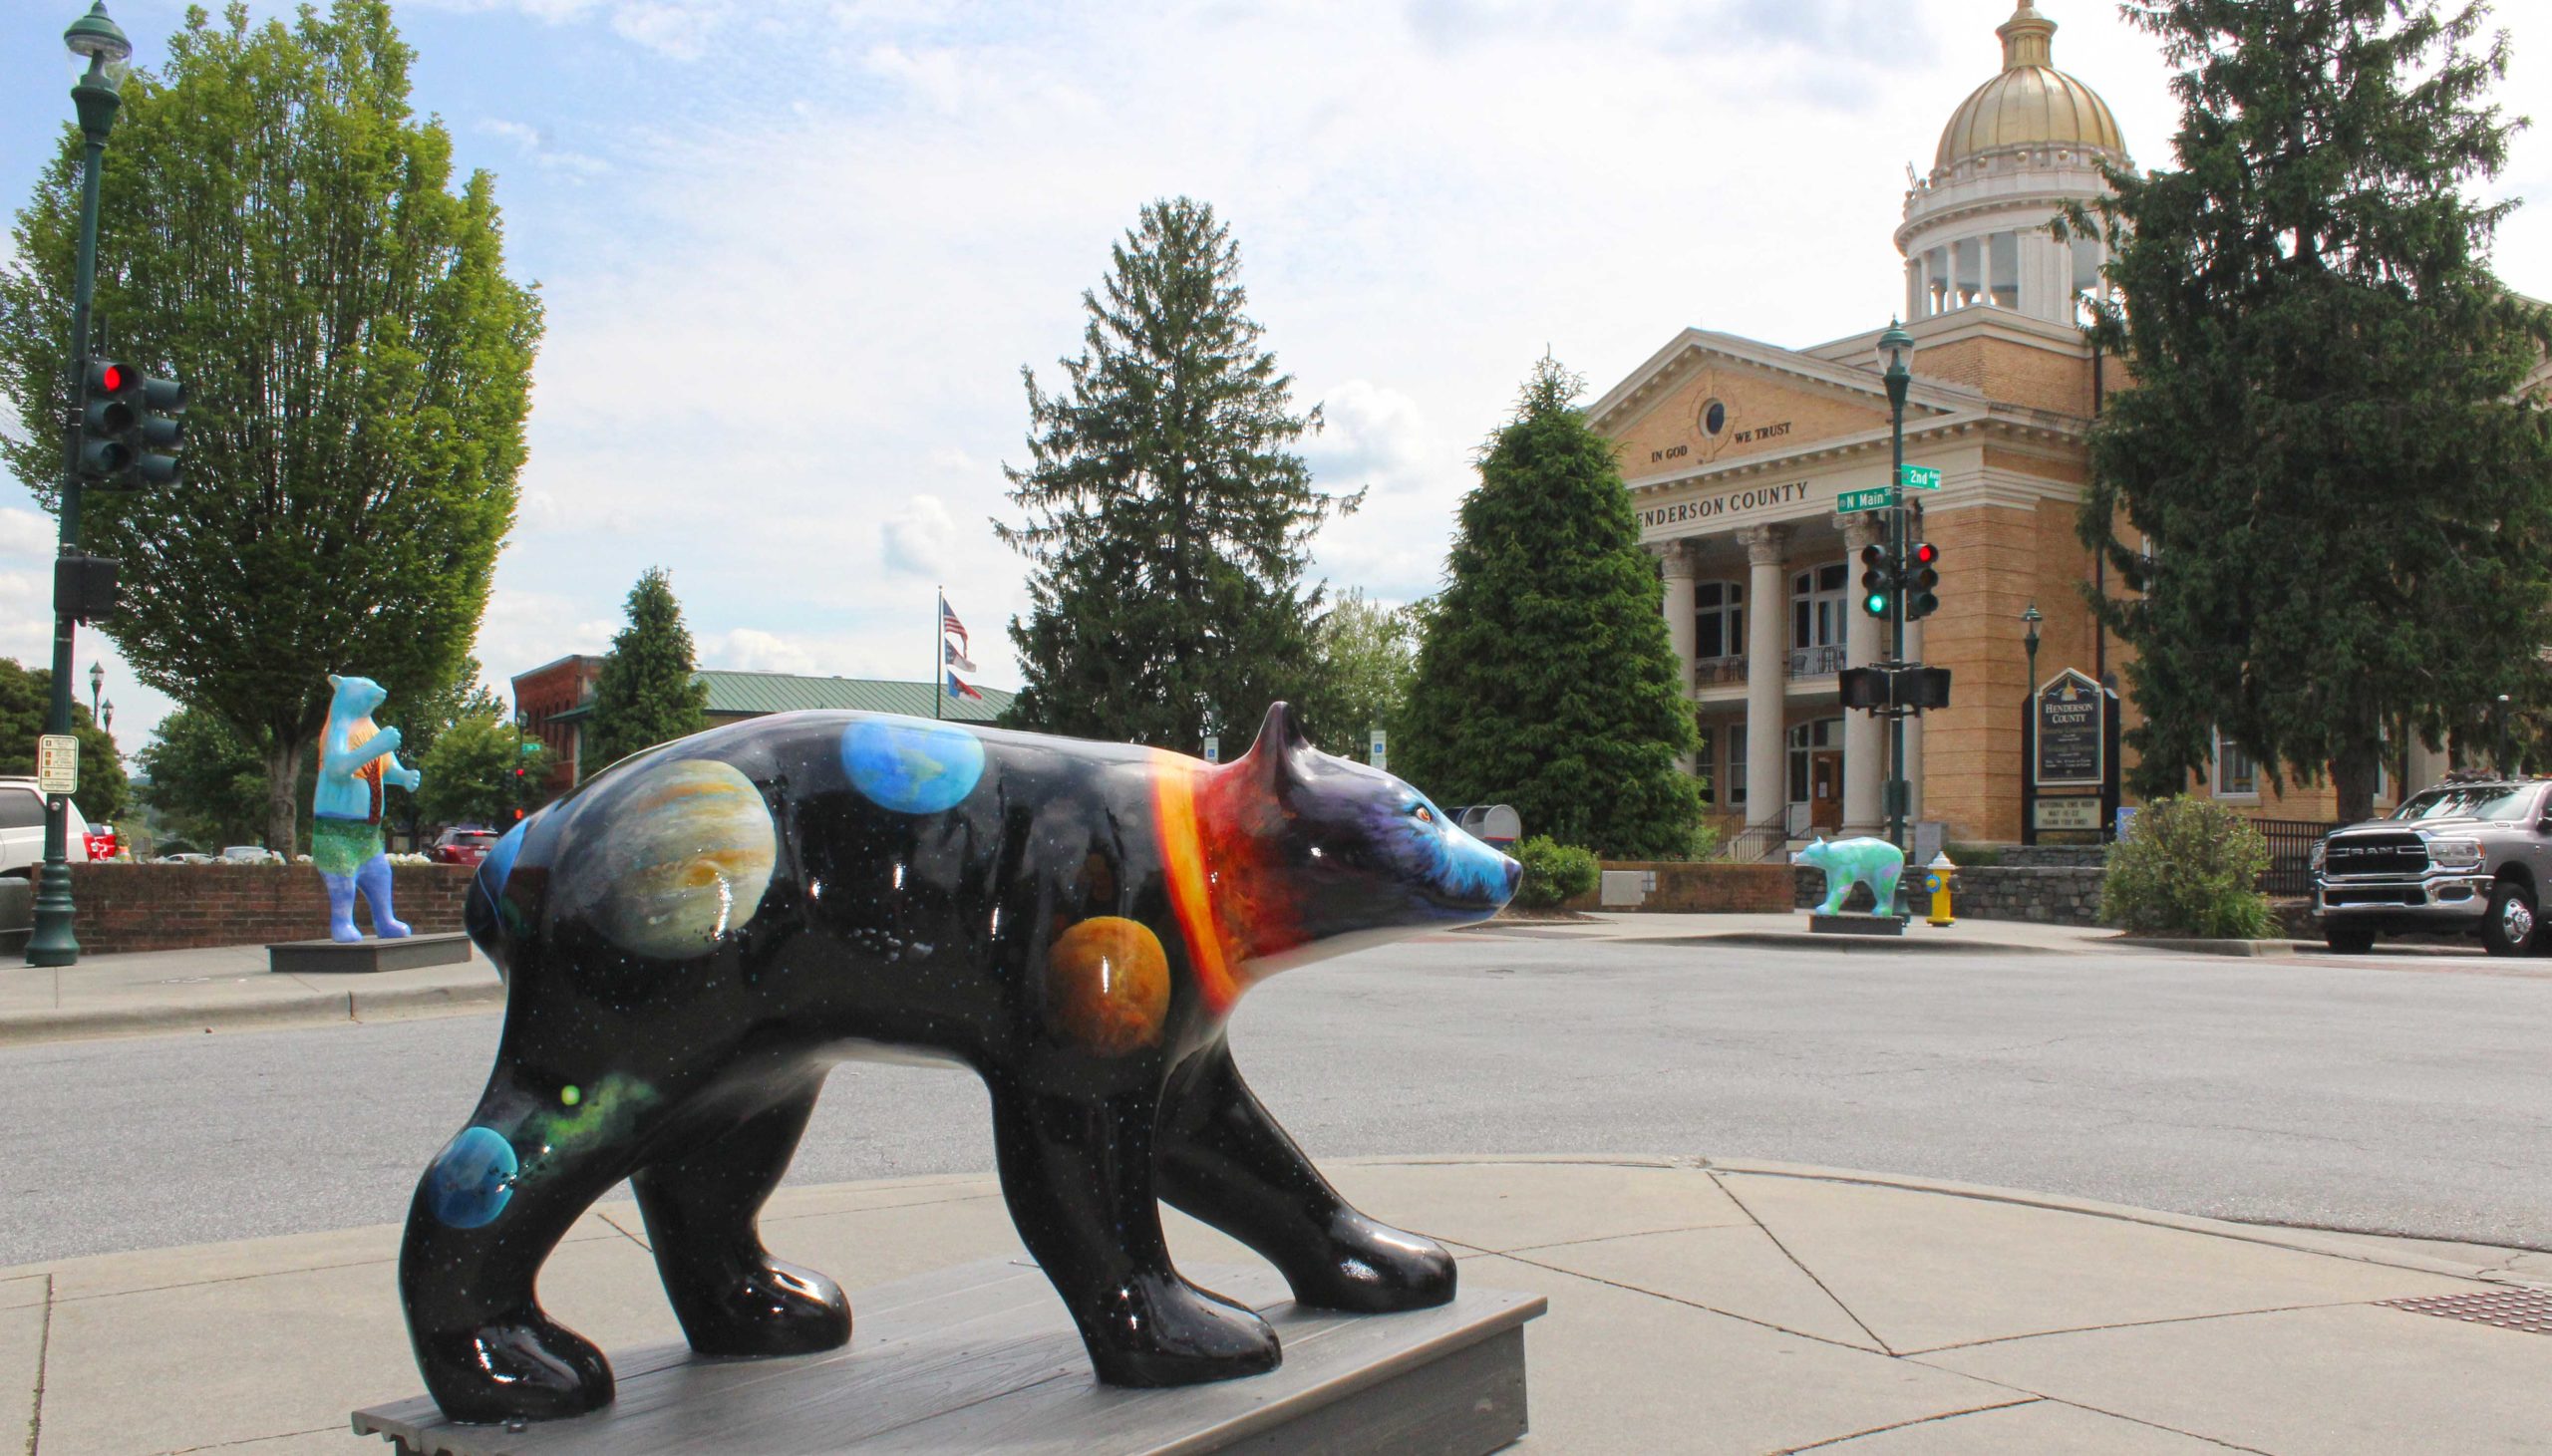 BEARFOOTIN 2024 BEARS TO BE REVEALED MAY 8TH AT WELCOME CENTER STAGE